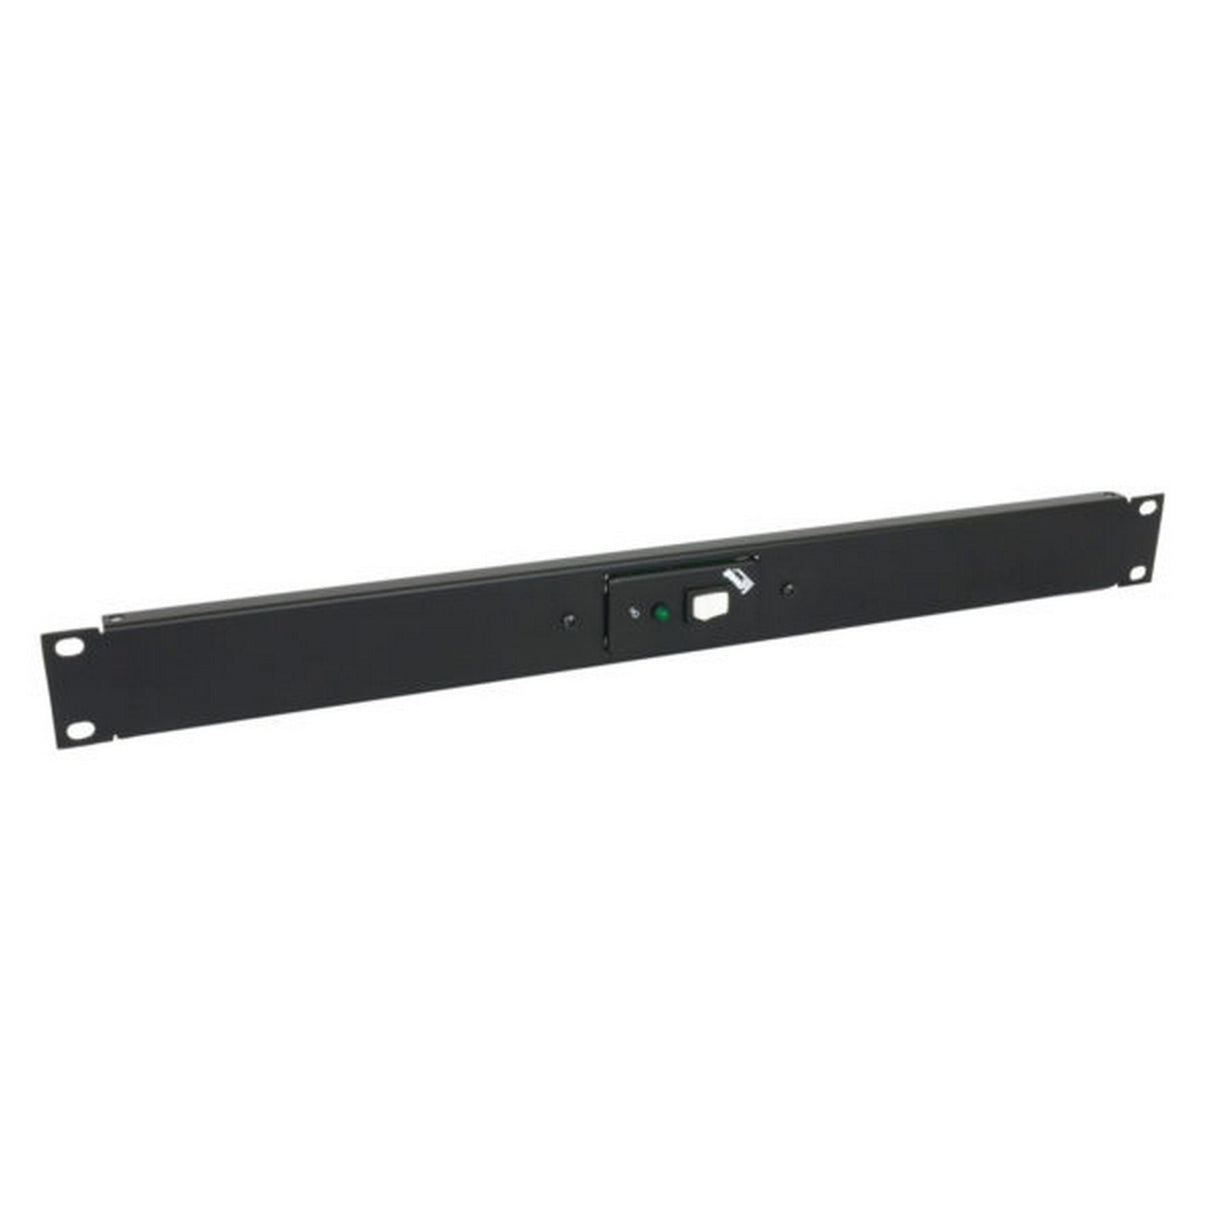 Lowell RPSB-R-RJ Maintained Single Pole Single Throw Low-Voltage Rackmount Switch with RJ45 Connector